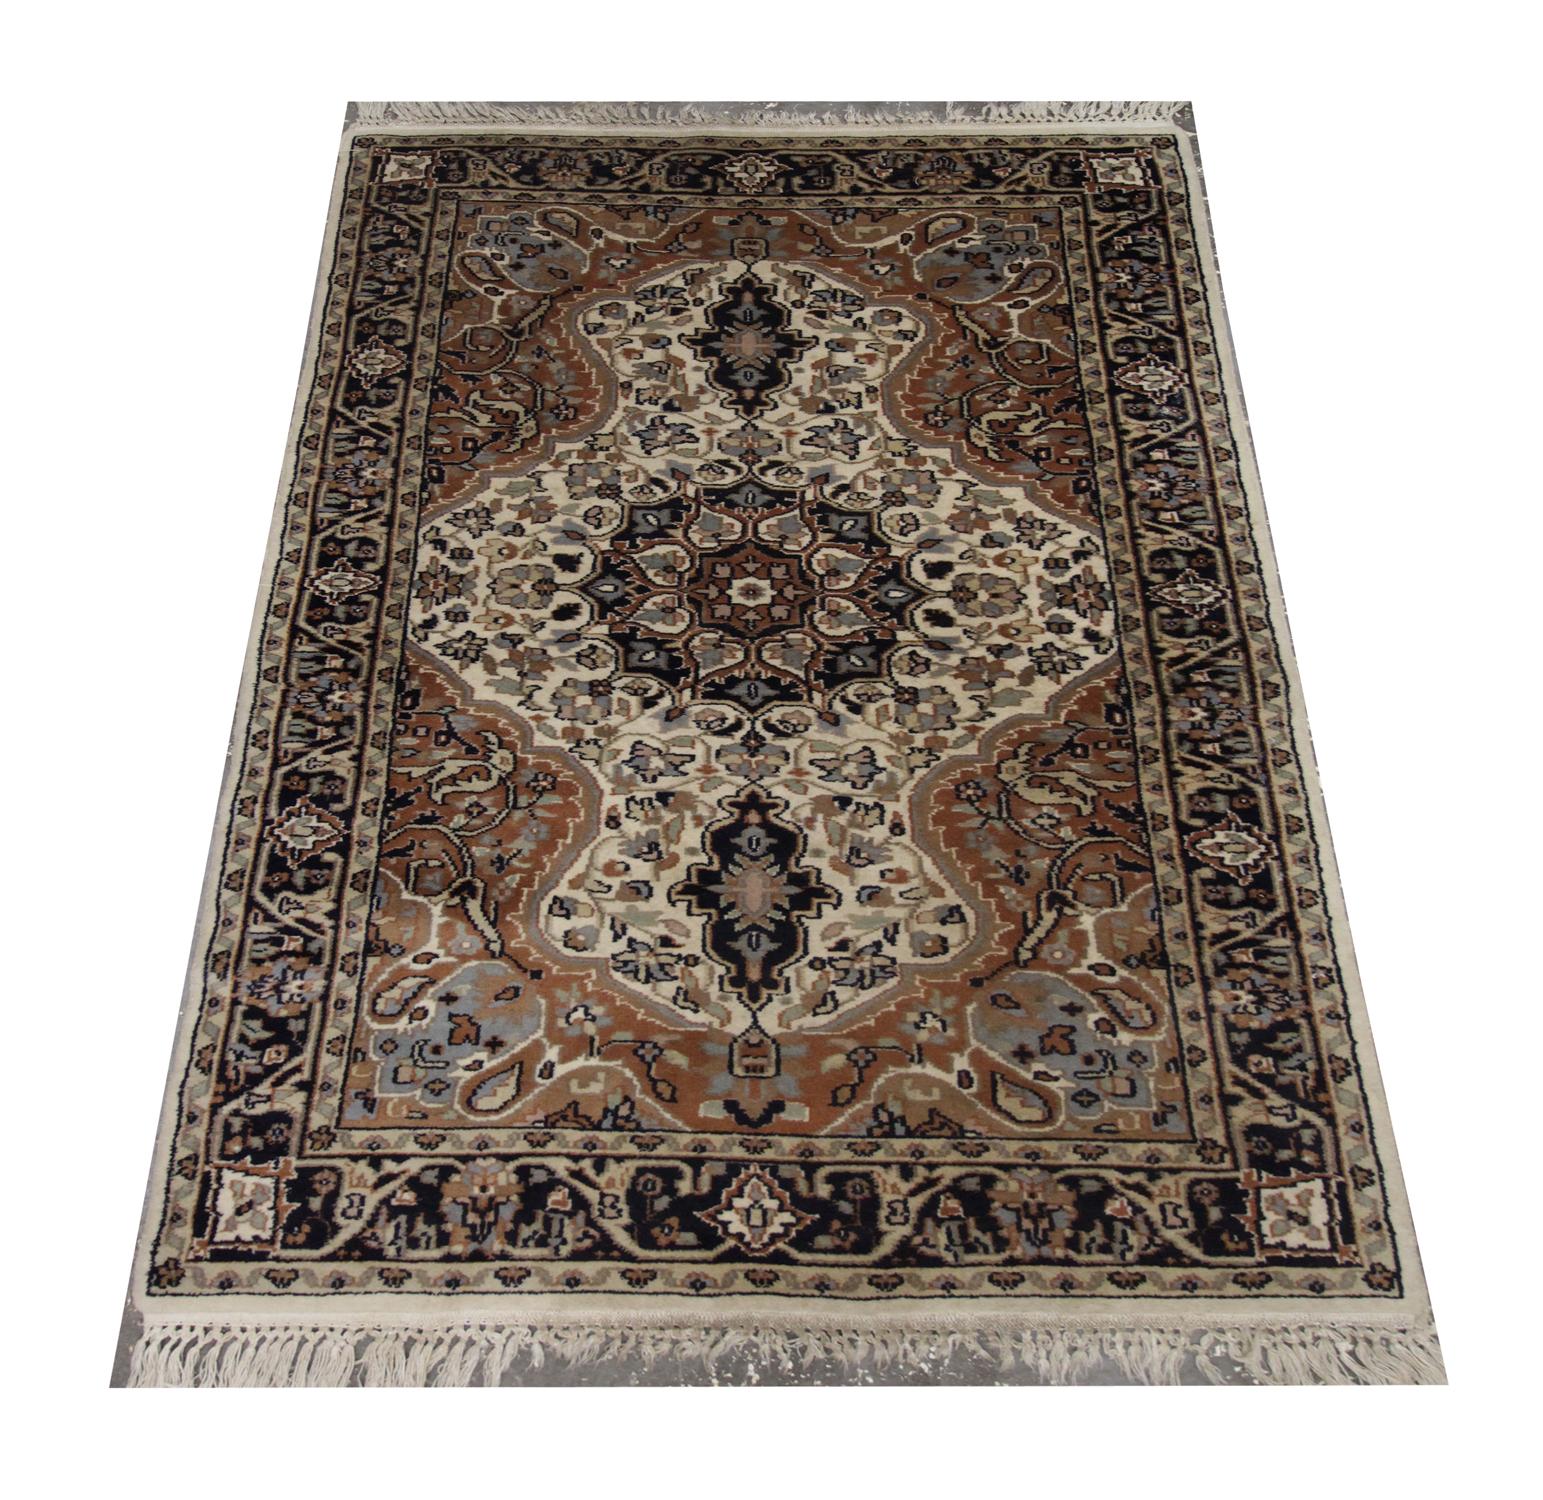 This oriental vintage Indian rug was handwoven in 1980 with a highly detailed central medallion design. Floral motifs meander from the centre in various colours of black, cream, grey and beige. This symmetrical design has been intricately woven. A